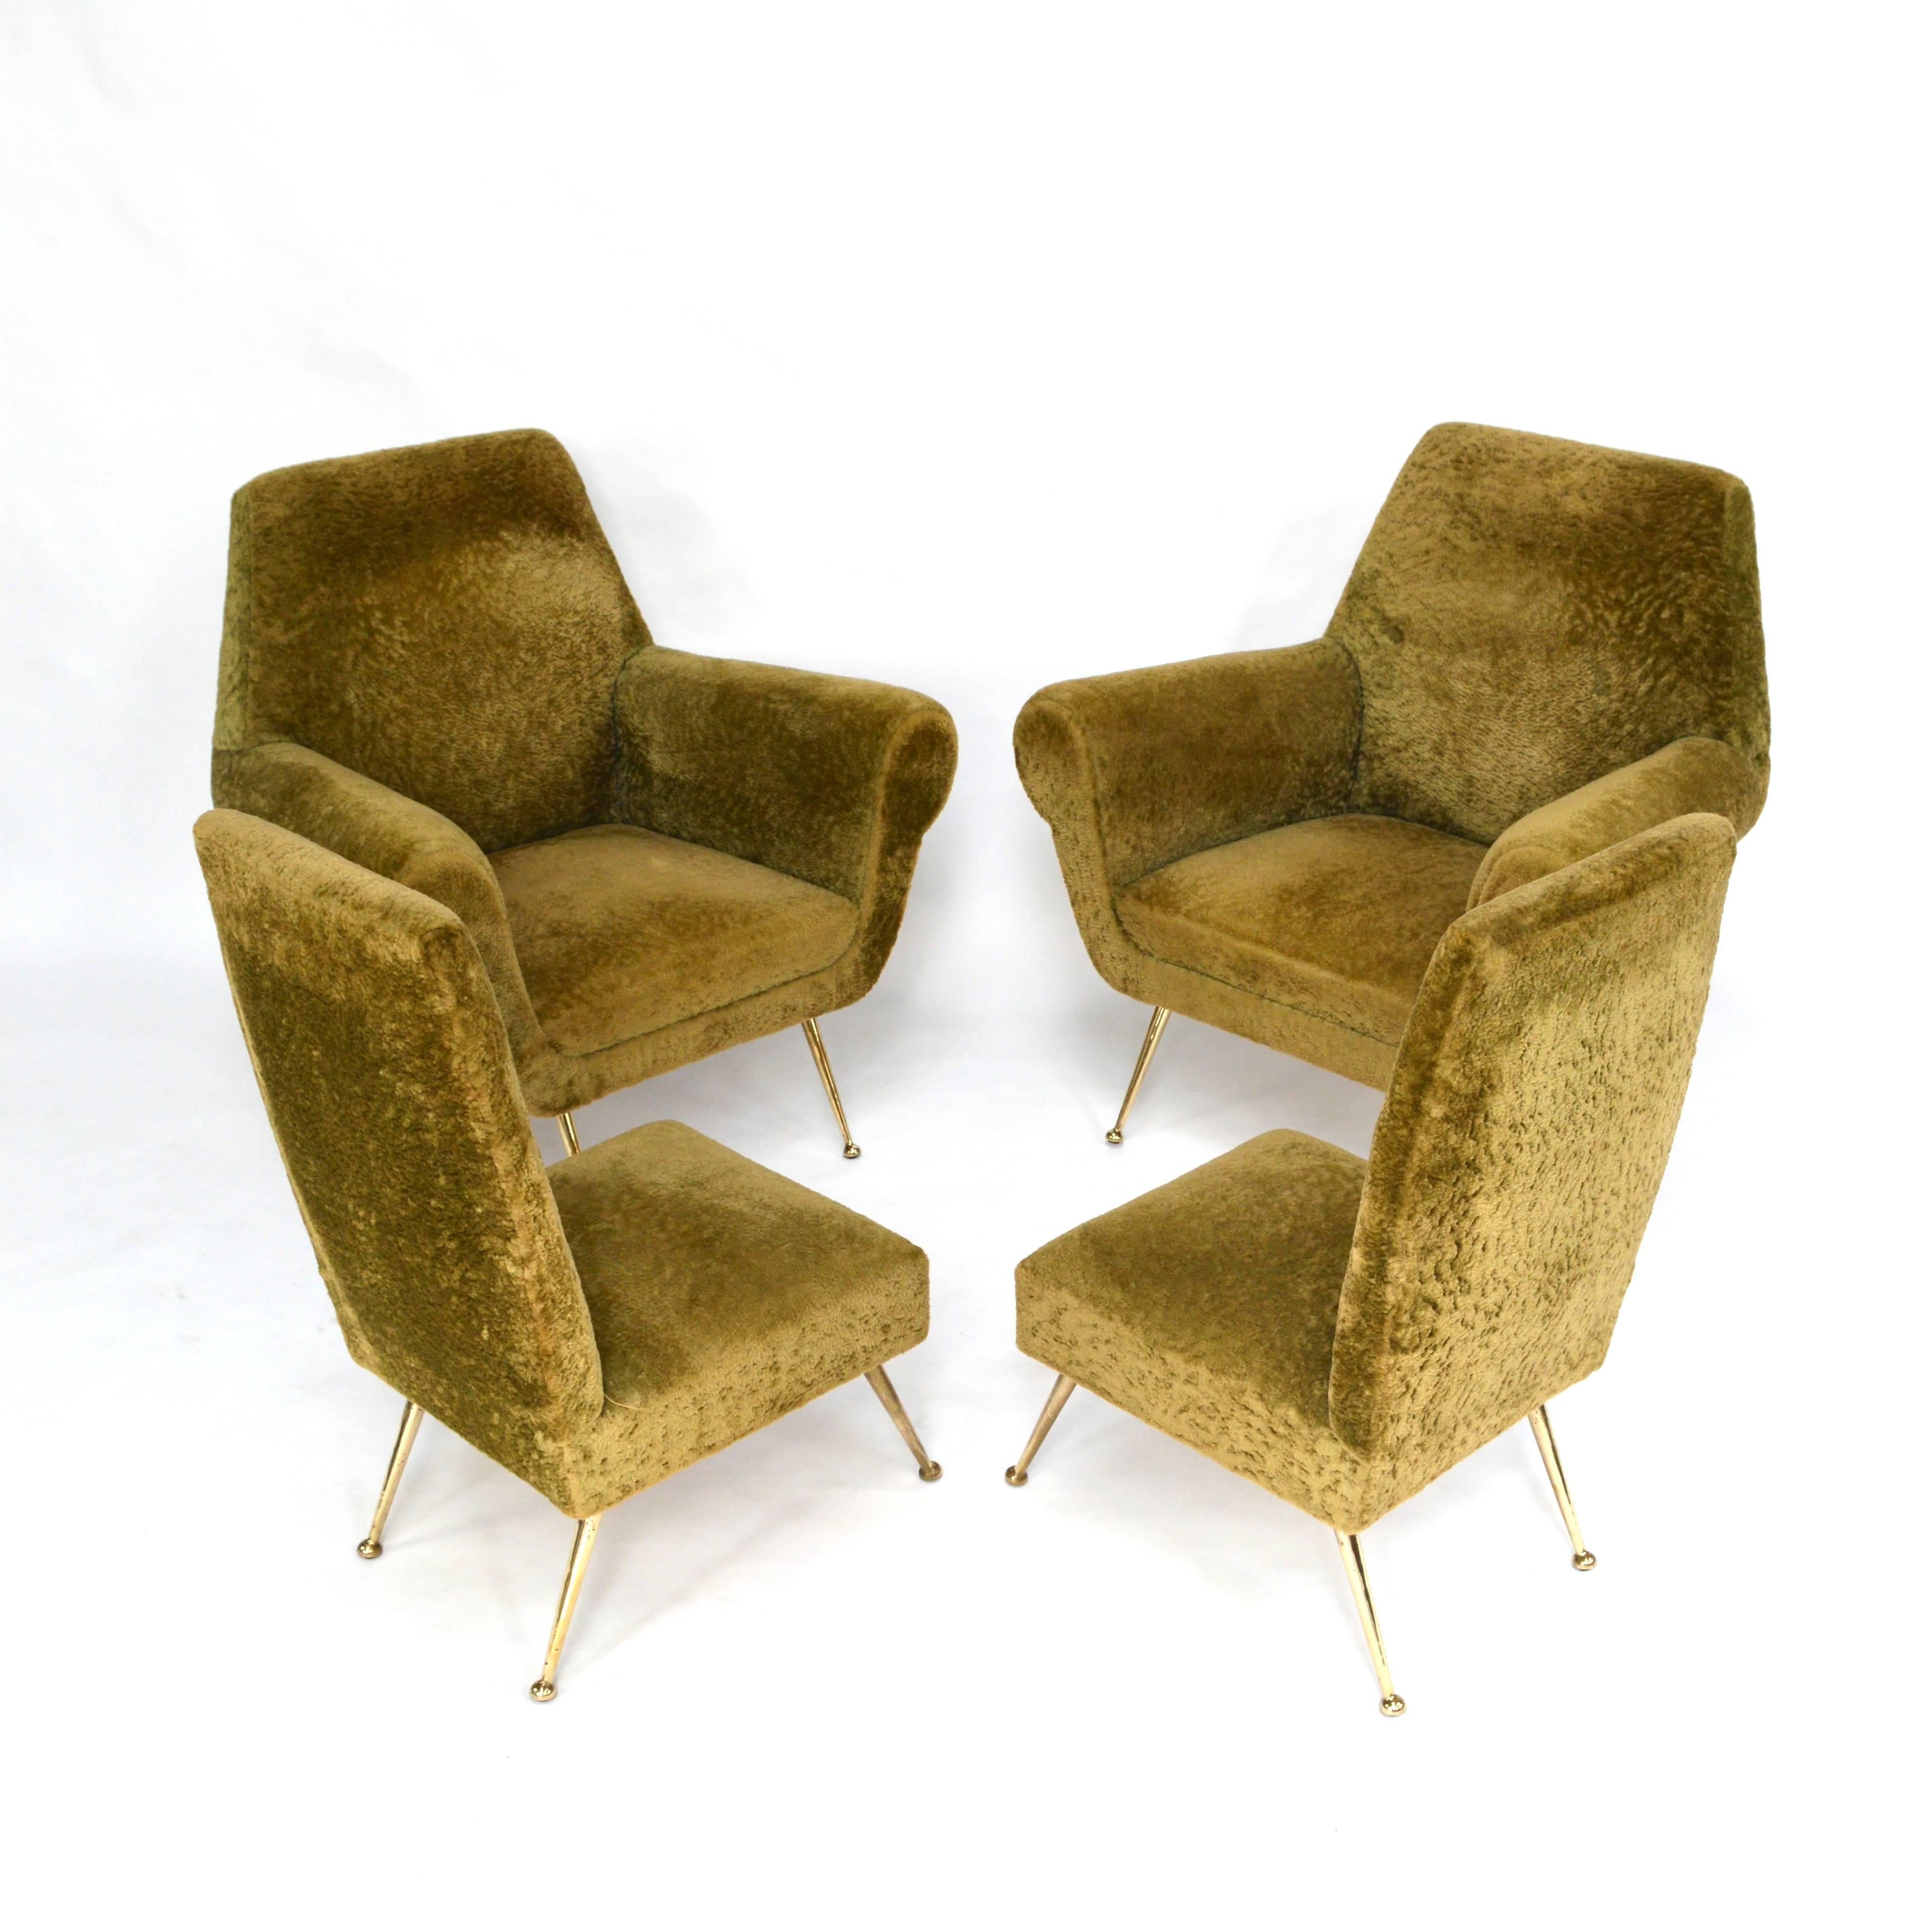 Rare to find set of Gigi Radice club lounge chairs and side chairs.
Original Pluche fabric and brass feet. The brass has been polished to original condition but still shows nice aged patina.
Also available with sofa.

Condition is very good but